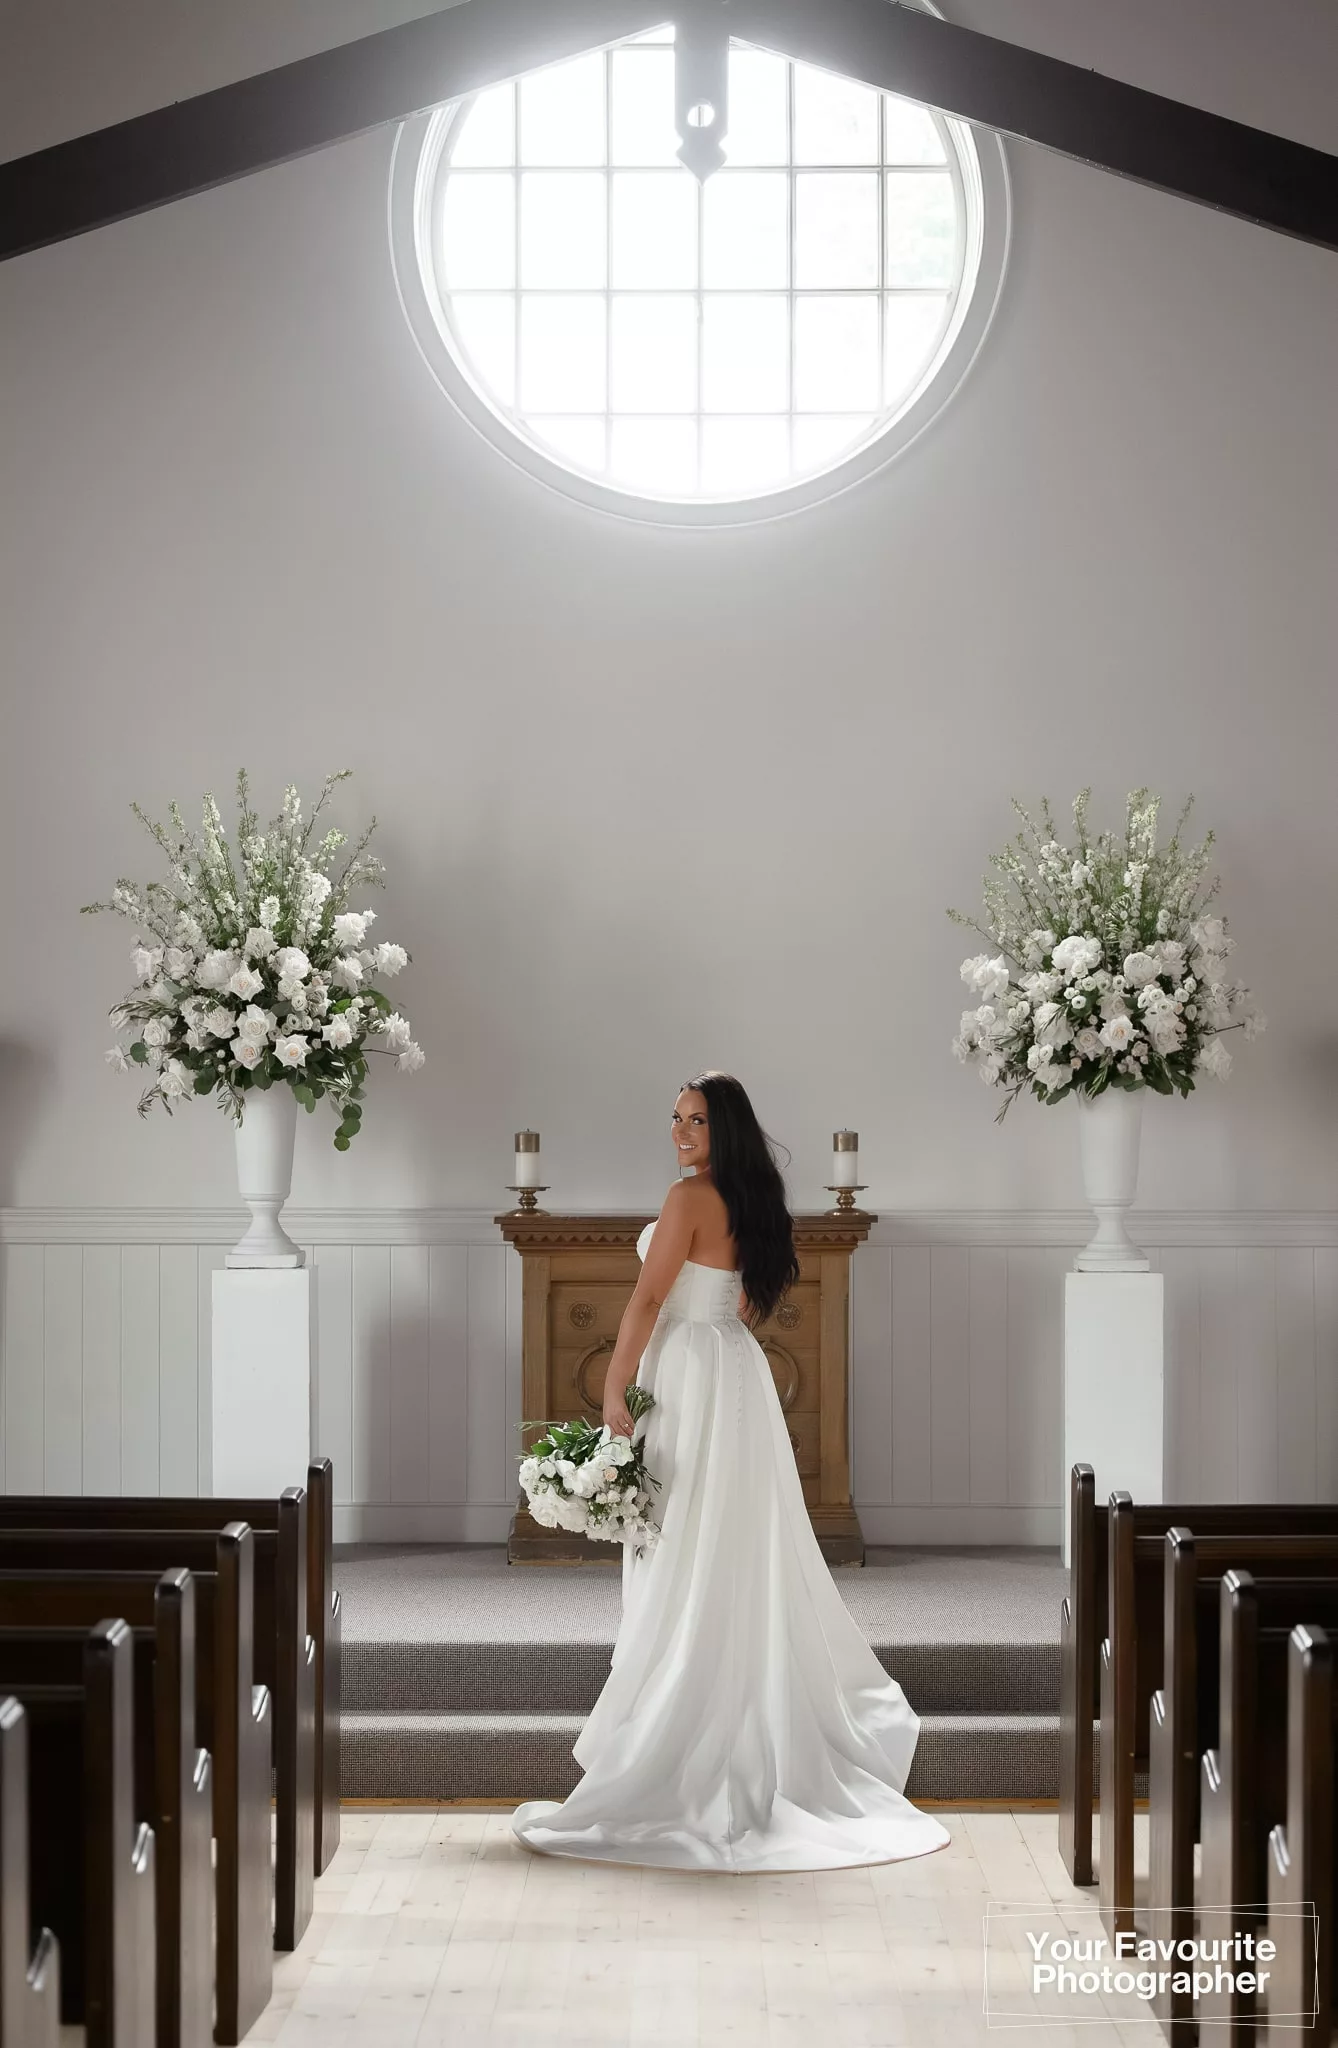 Bride standing alone at the altar with her bouquet, flanked by pedestals with white flowers